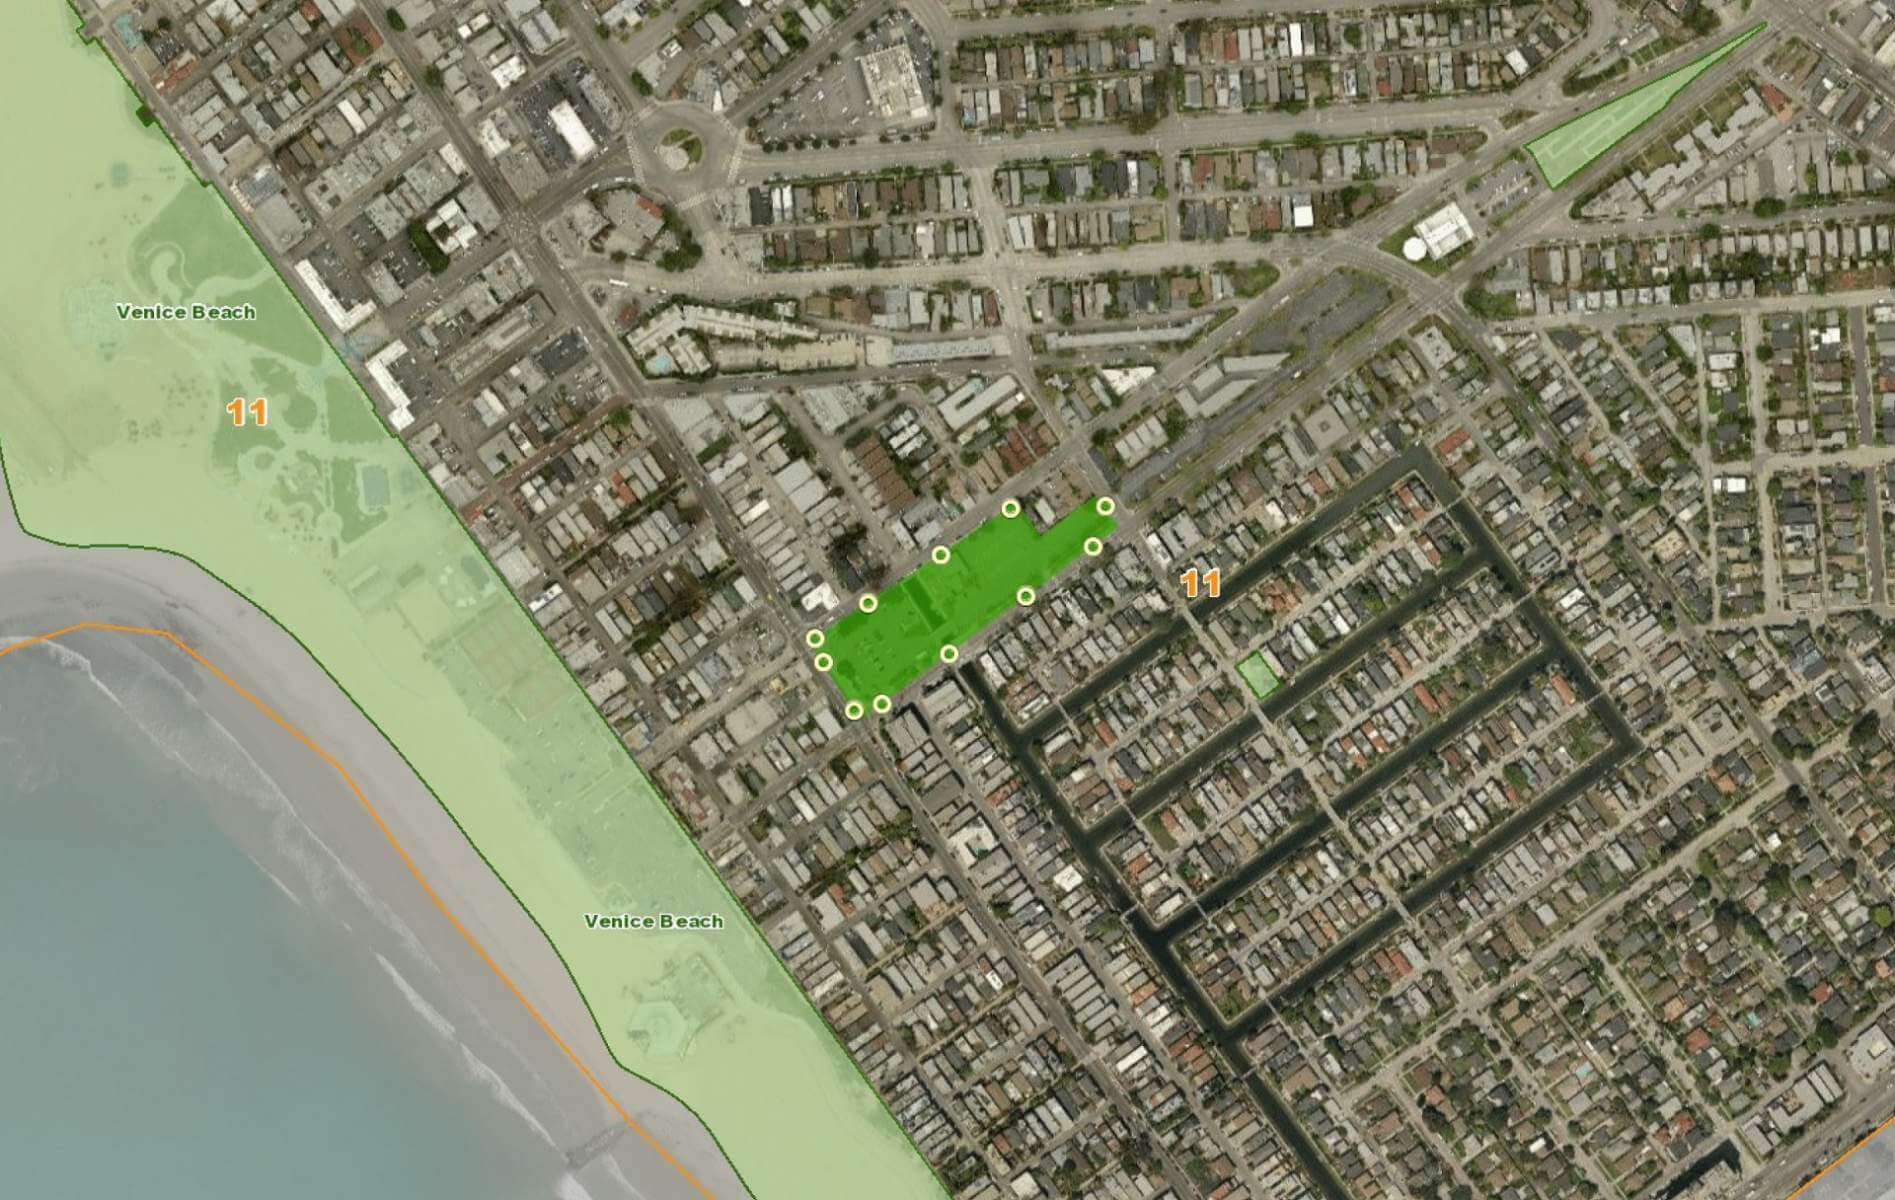 A map of Venice, L.A., showing a new development along the canal before the beach